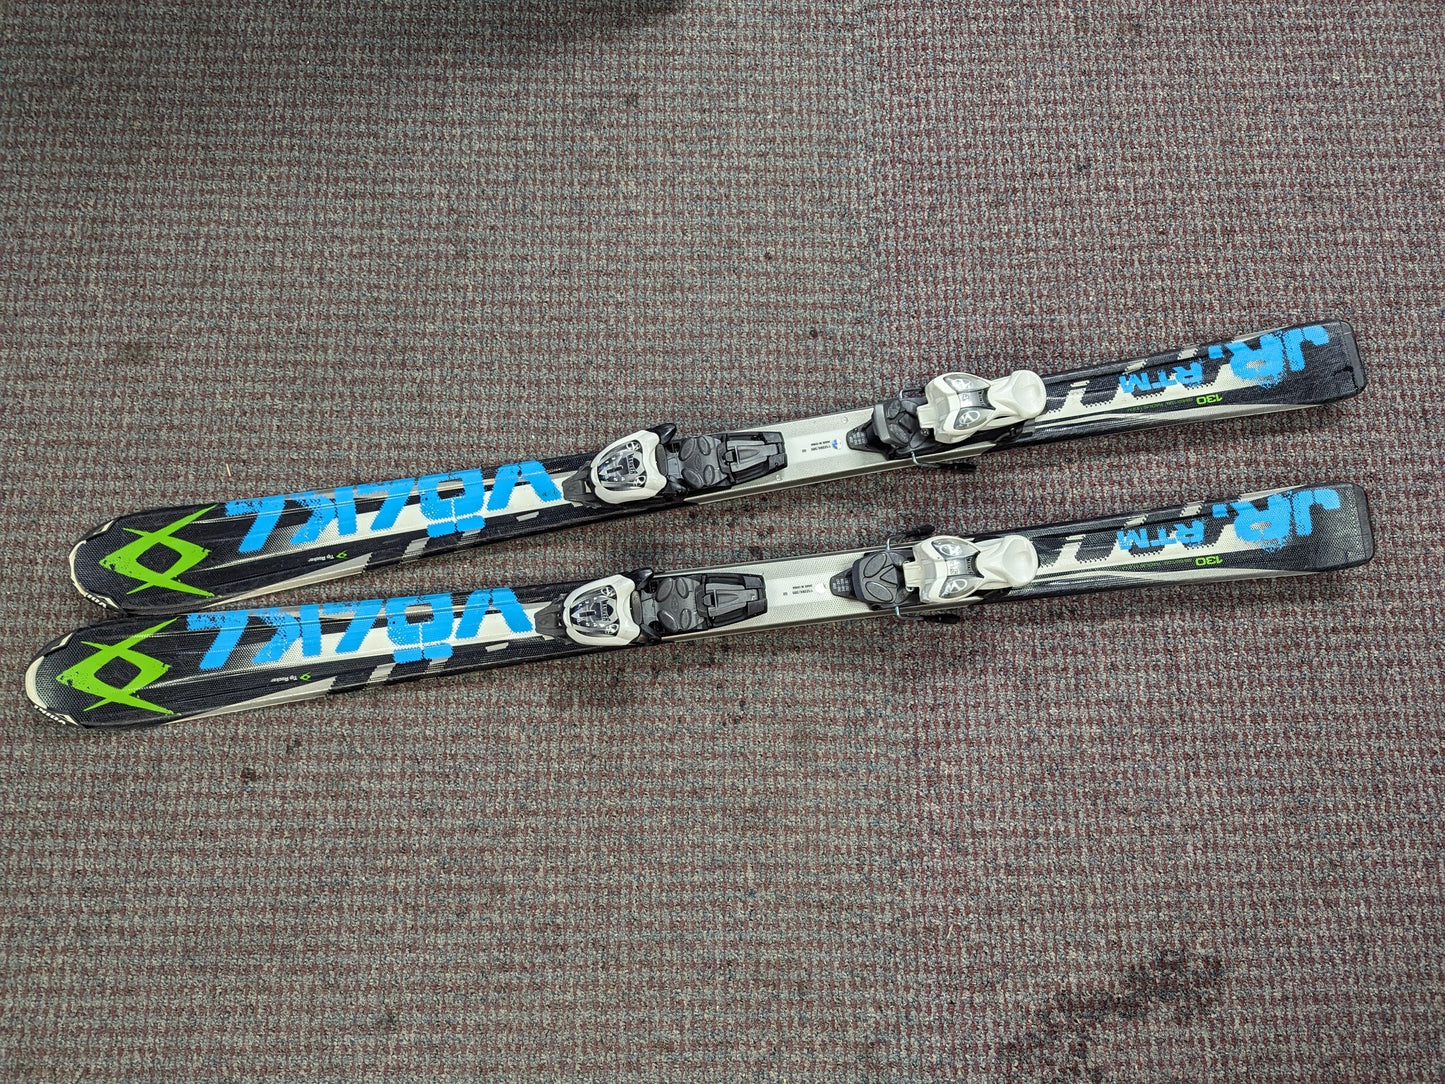 Volkl RTM JR. Skis w/Marker Bindings Size 130 Cm Color Blue Condition Used